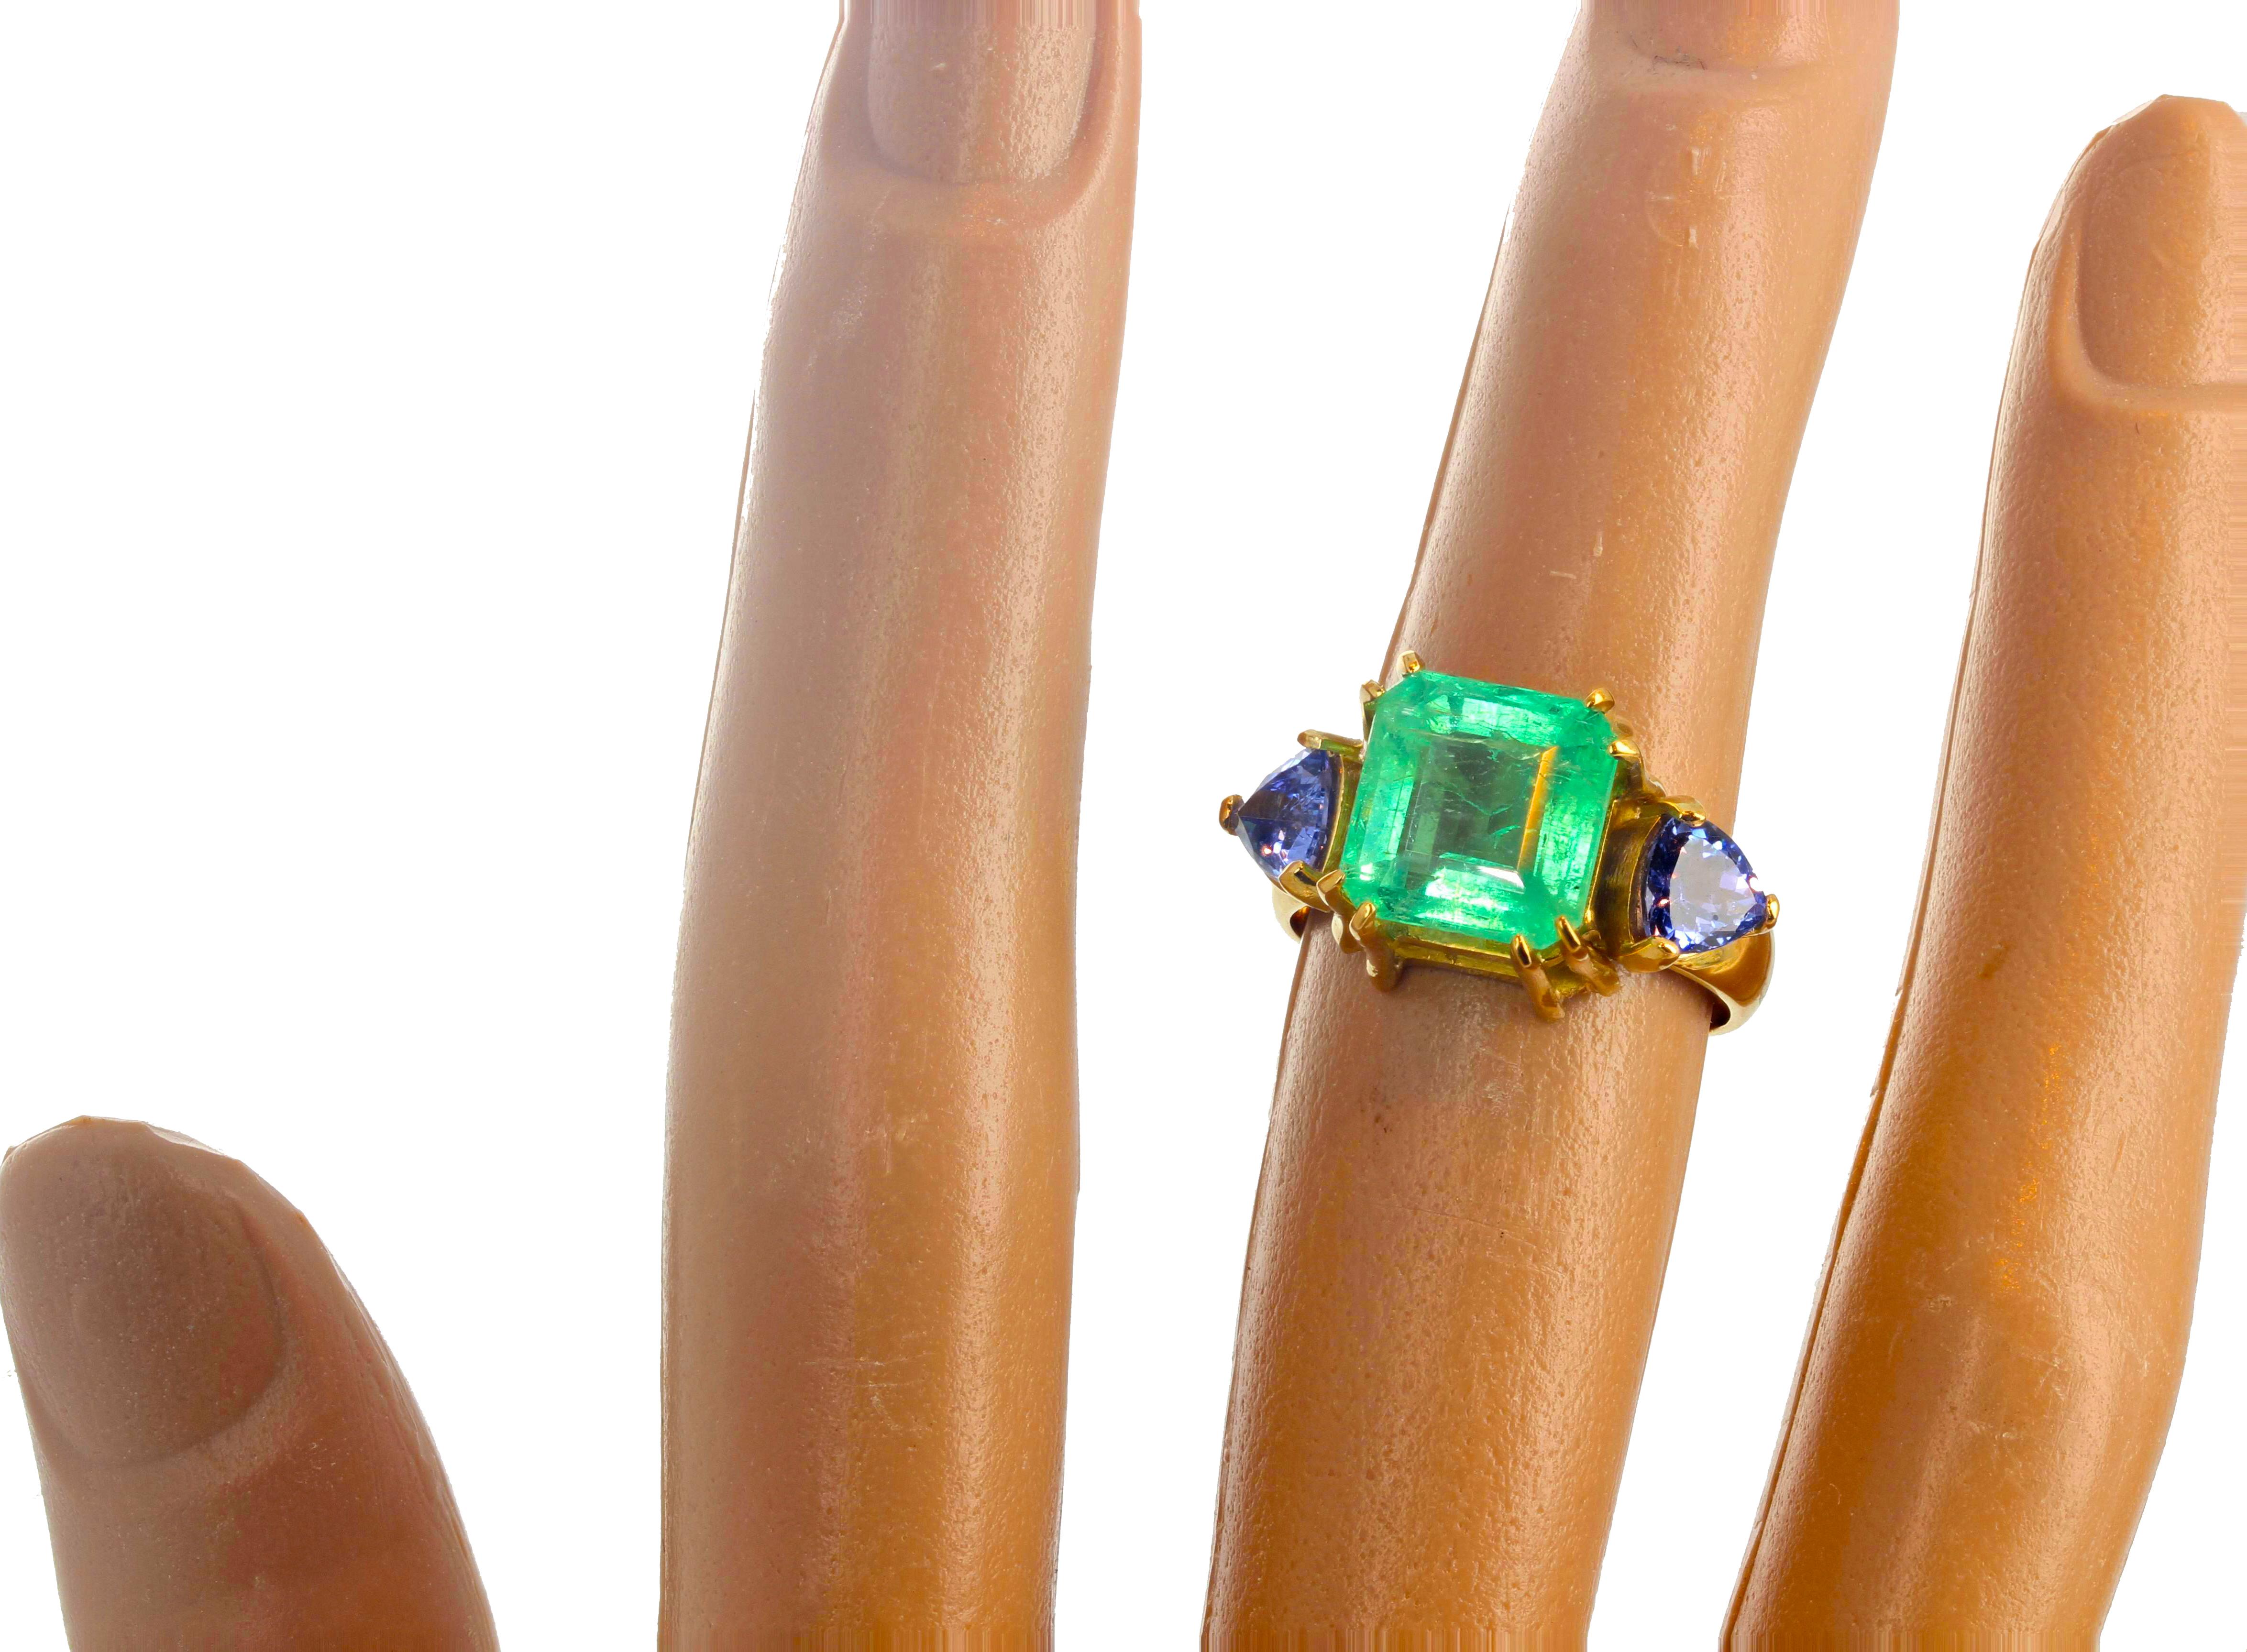 This spectacular natural center Columbian Emerald gemstone is 2.8 carats - 9.65mm x 9.30 mm -  enhanced with 6 mm x 6 mm trillion cut natural bright blue Tanzanites.  Handmade 18Kt yellow gold setting size 7 (sizable).  Please note that this